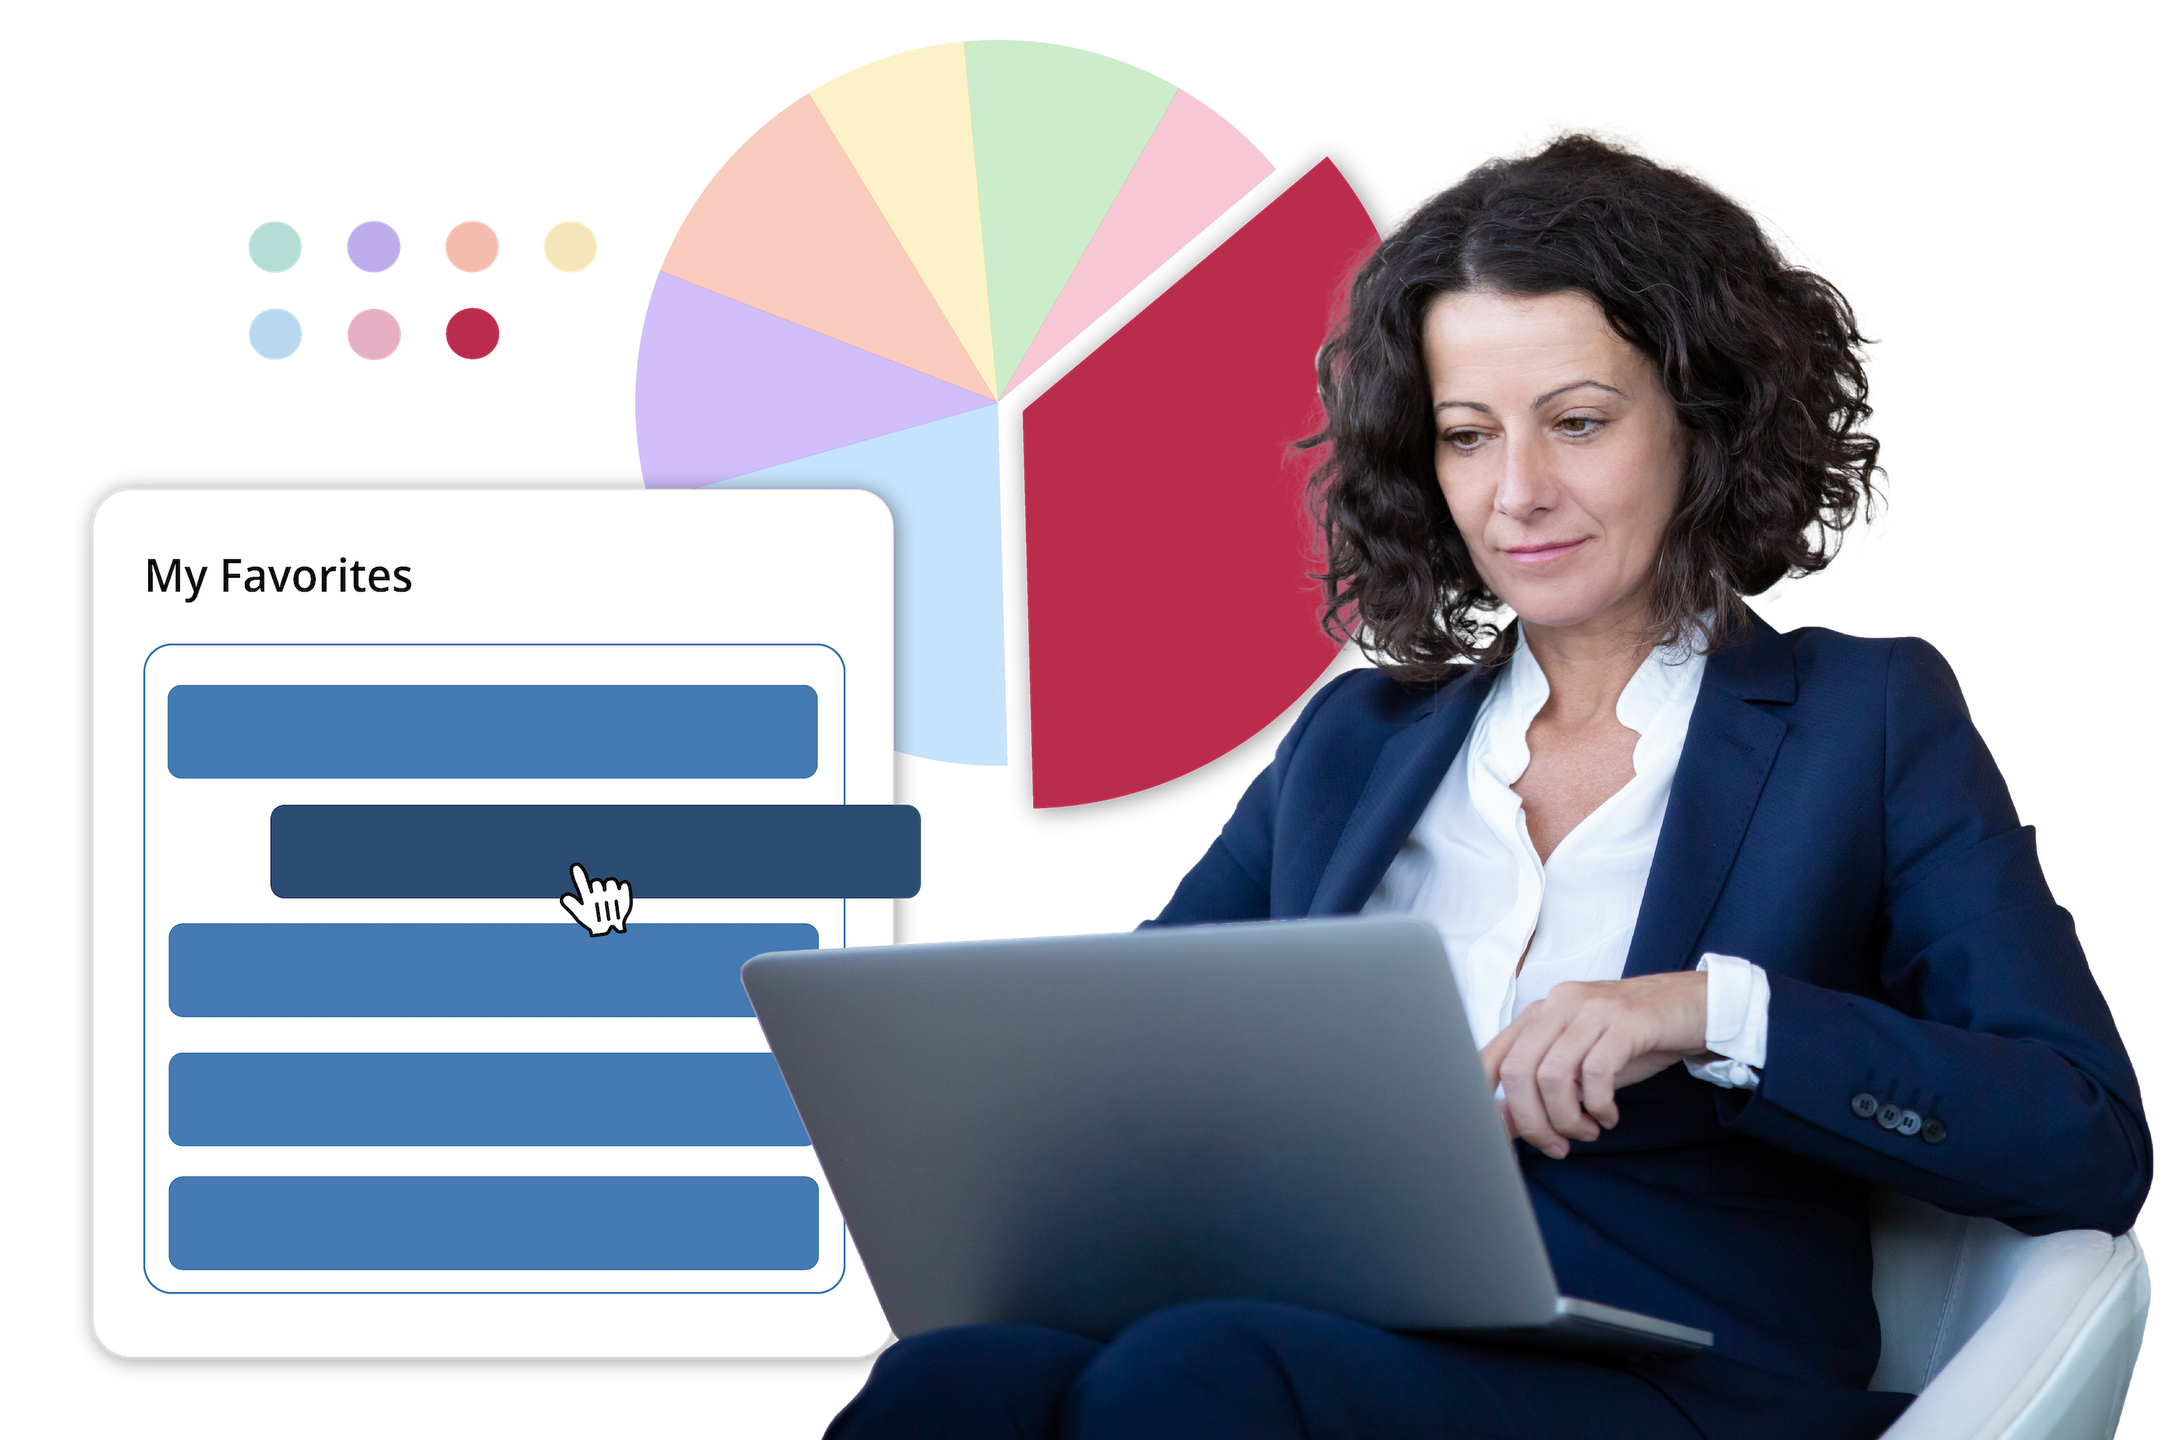 Collage business woman using laptop selecting creating favorites list